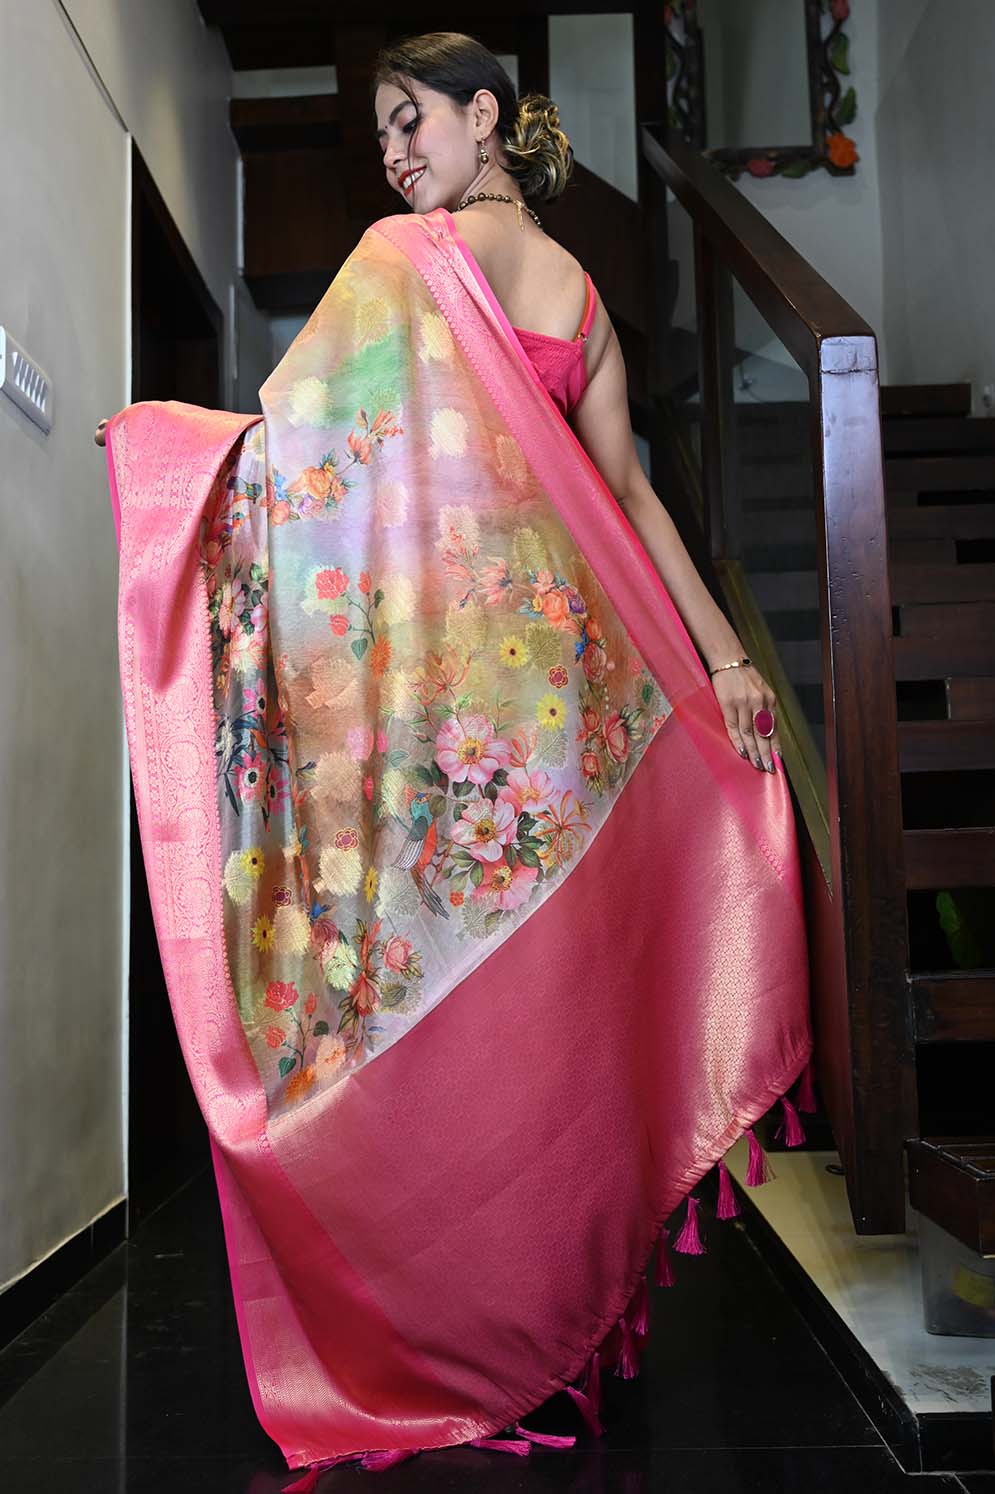 Ready To Wear Silk Chanderi Artistic Floral Printed With Gold Tonned Zari Border   Wrap in 1 minute saree - Isadora Life